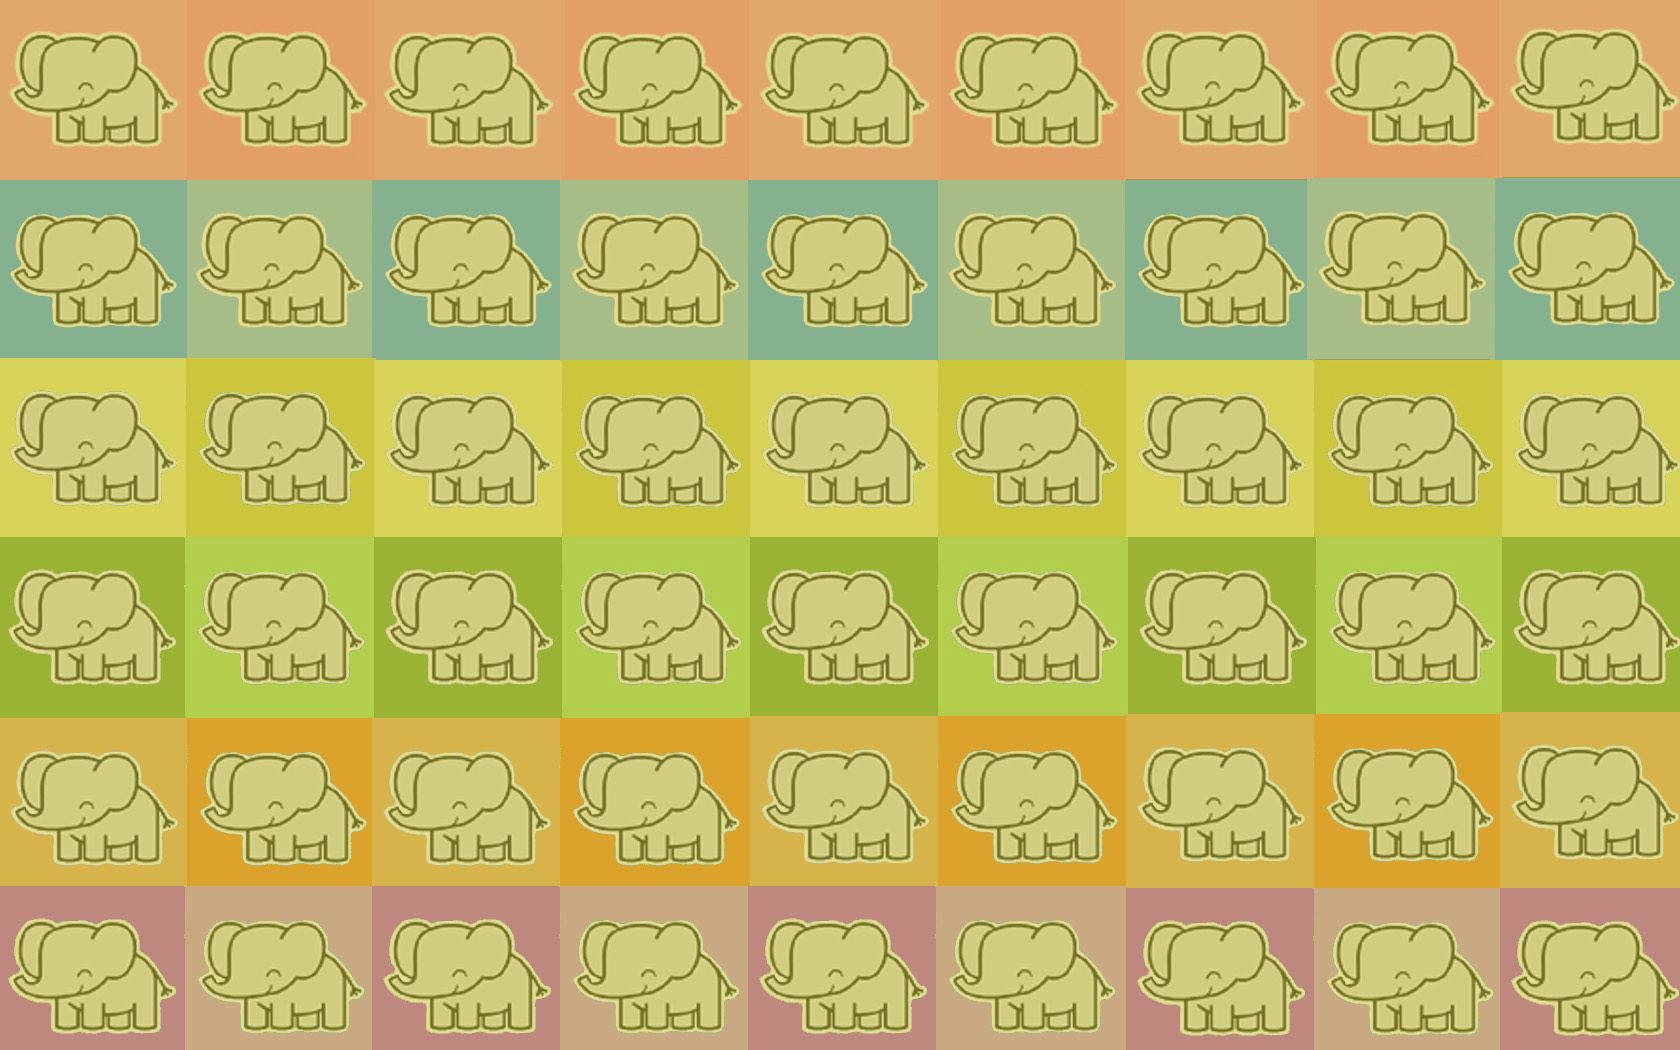 Multi-colored elephant pattern background wallpaper.